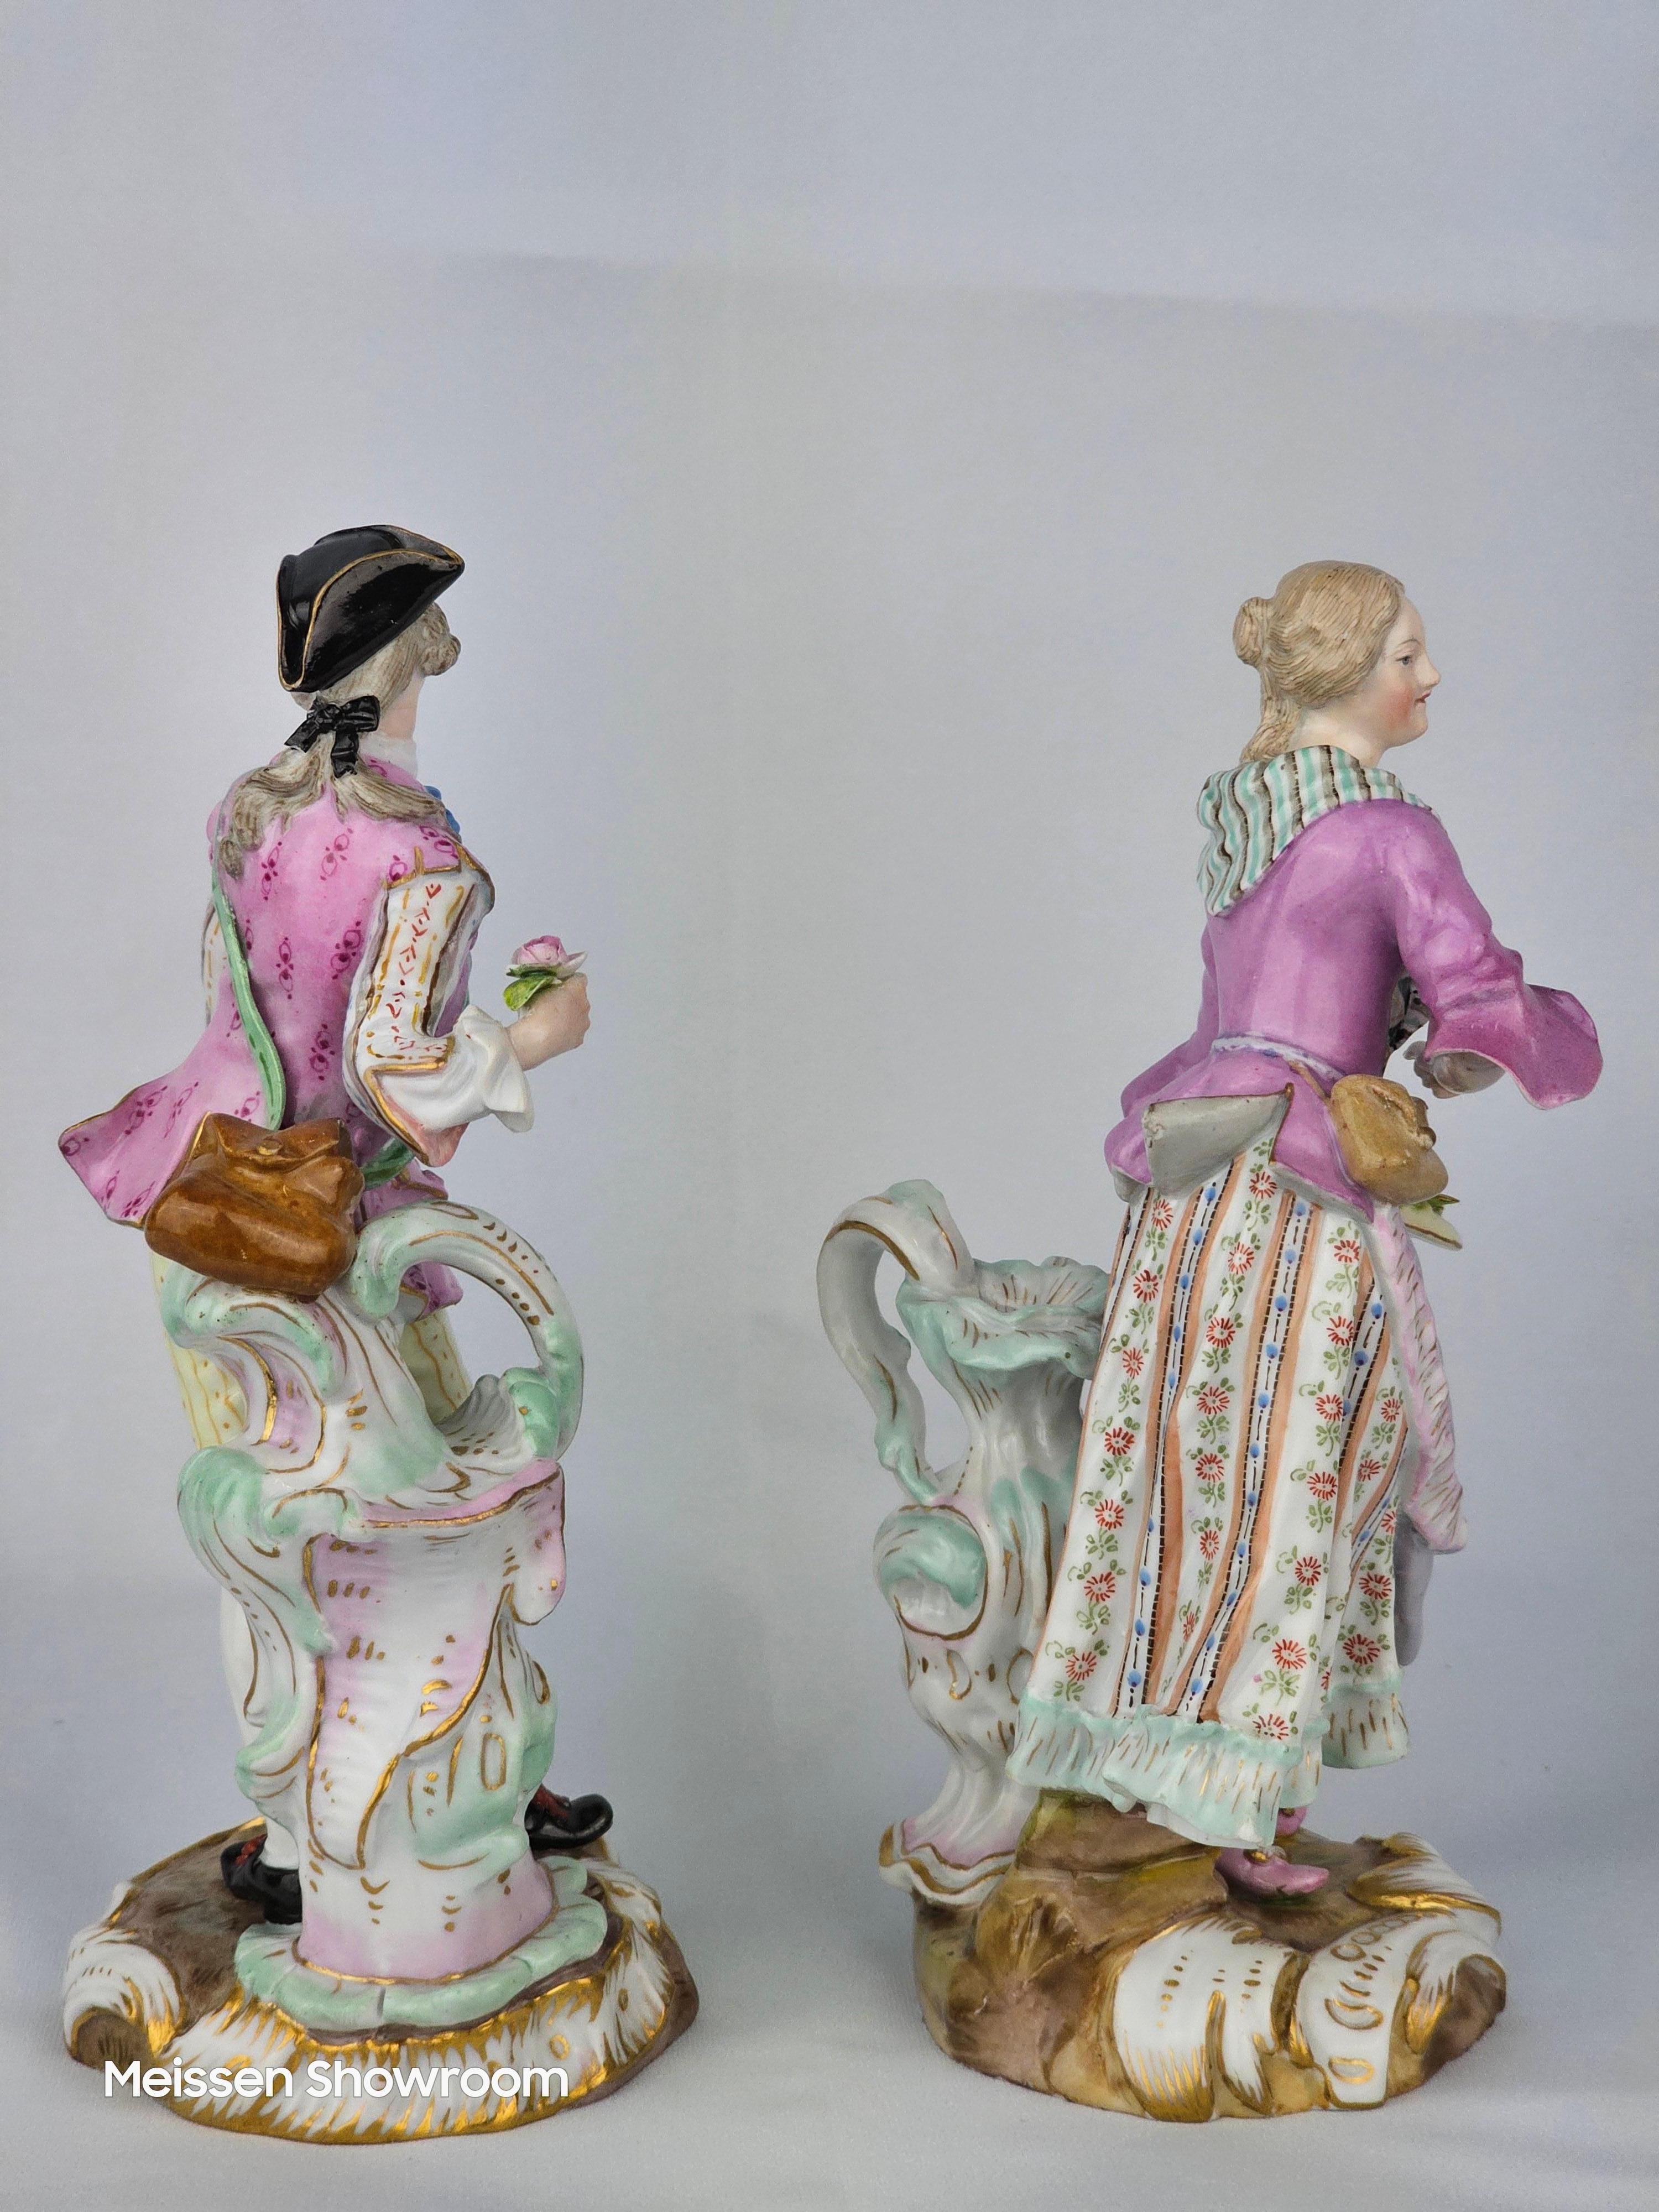 Meissen Shephard and Shepherdess collecting fruit next to large ewer First modelled by Meyer in 1760.

Circa 1860
Model number is 1776 and 1774.
Underglaze Blue crossed swords